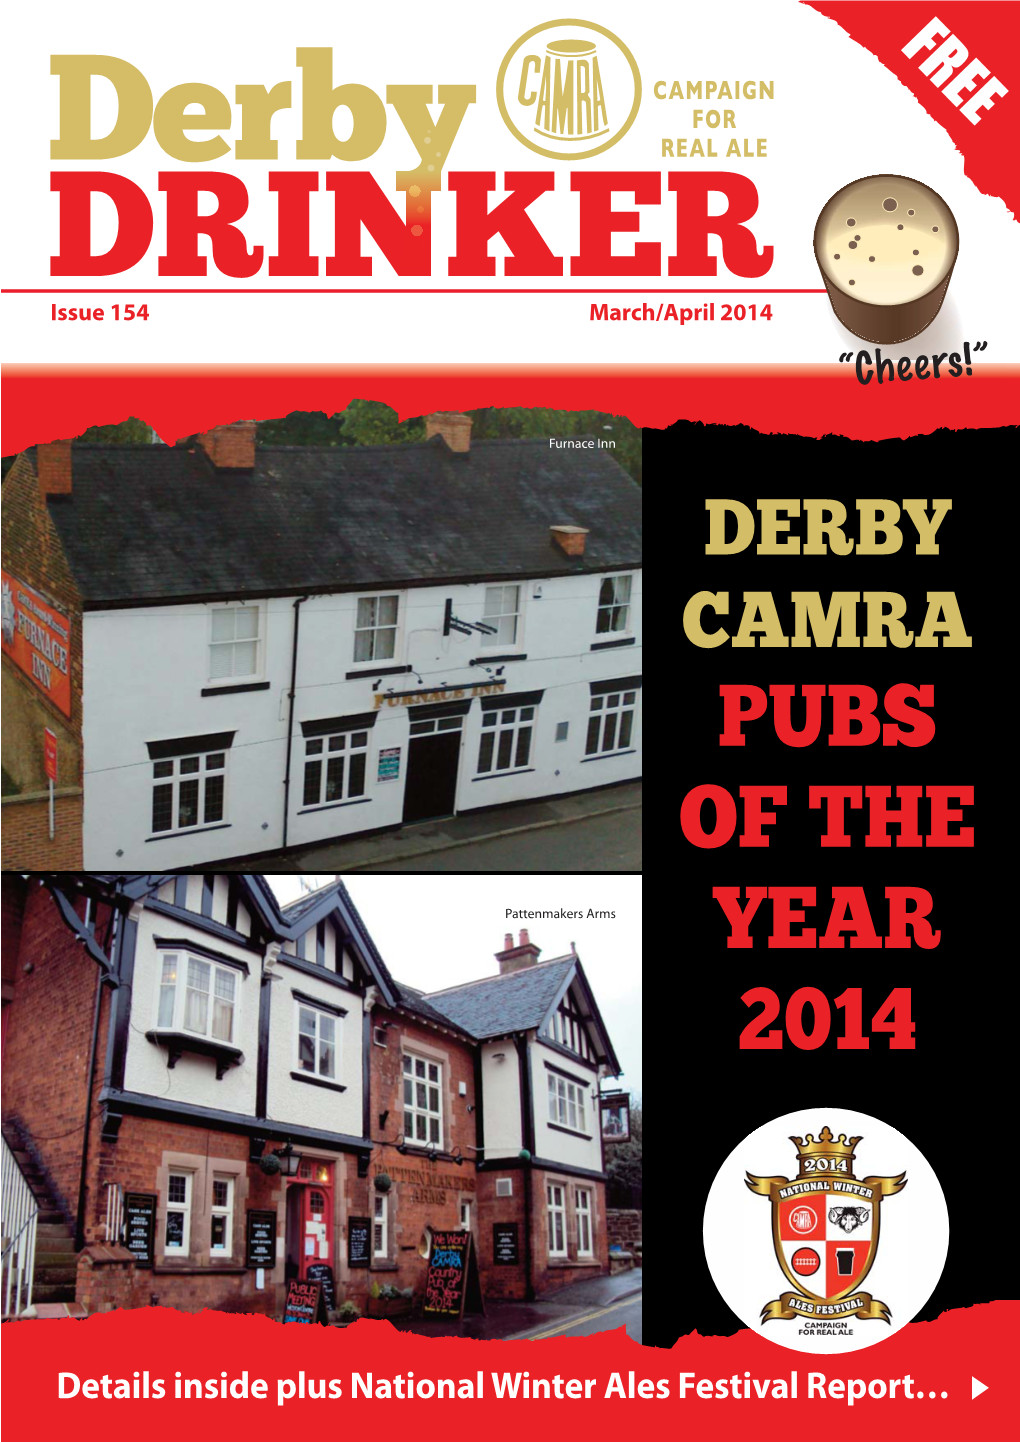 Pubs of the Year 2014